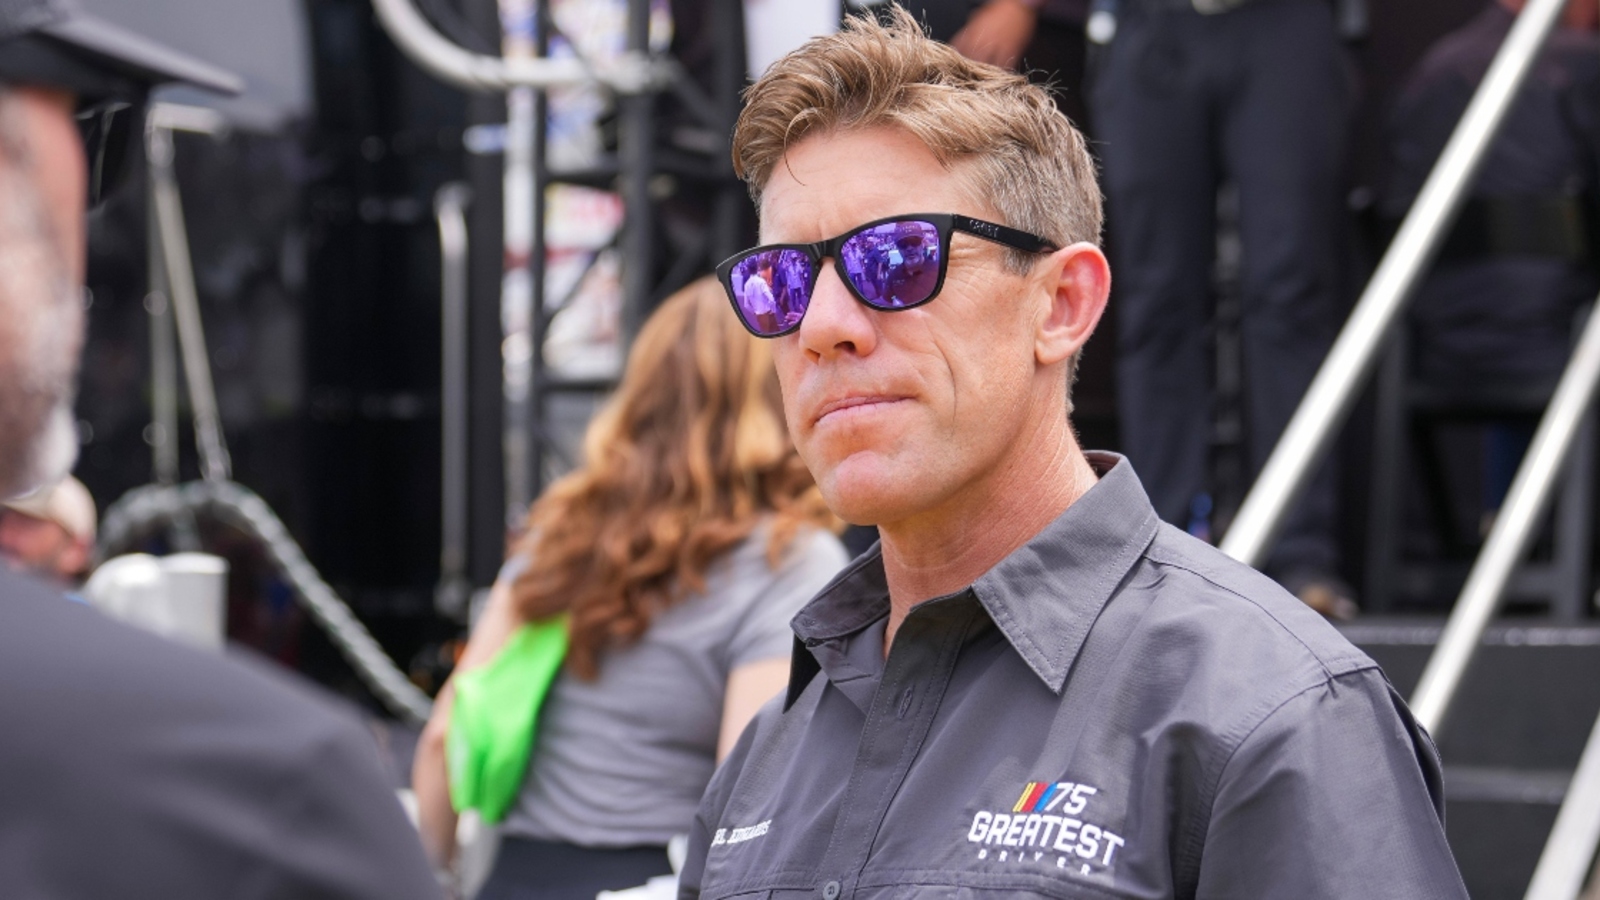 Carl Edwards open to broadcasting NASCAR races, but doesn’t plan on racing again